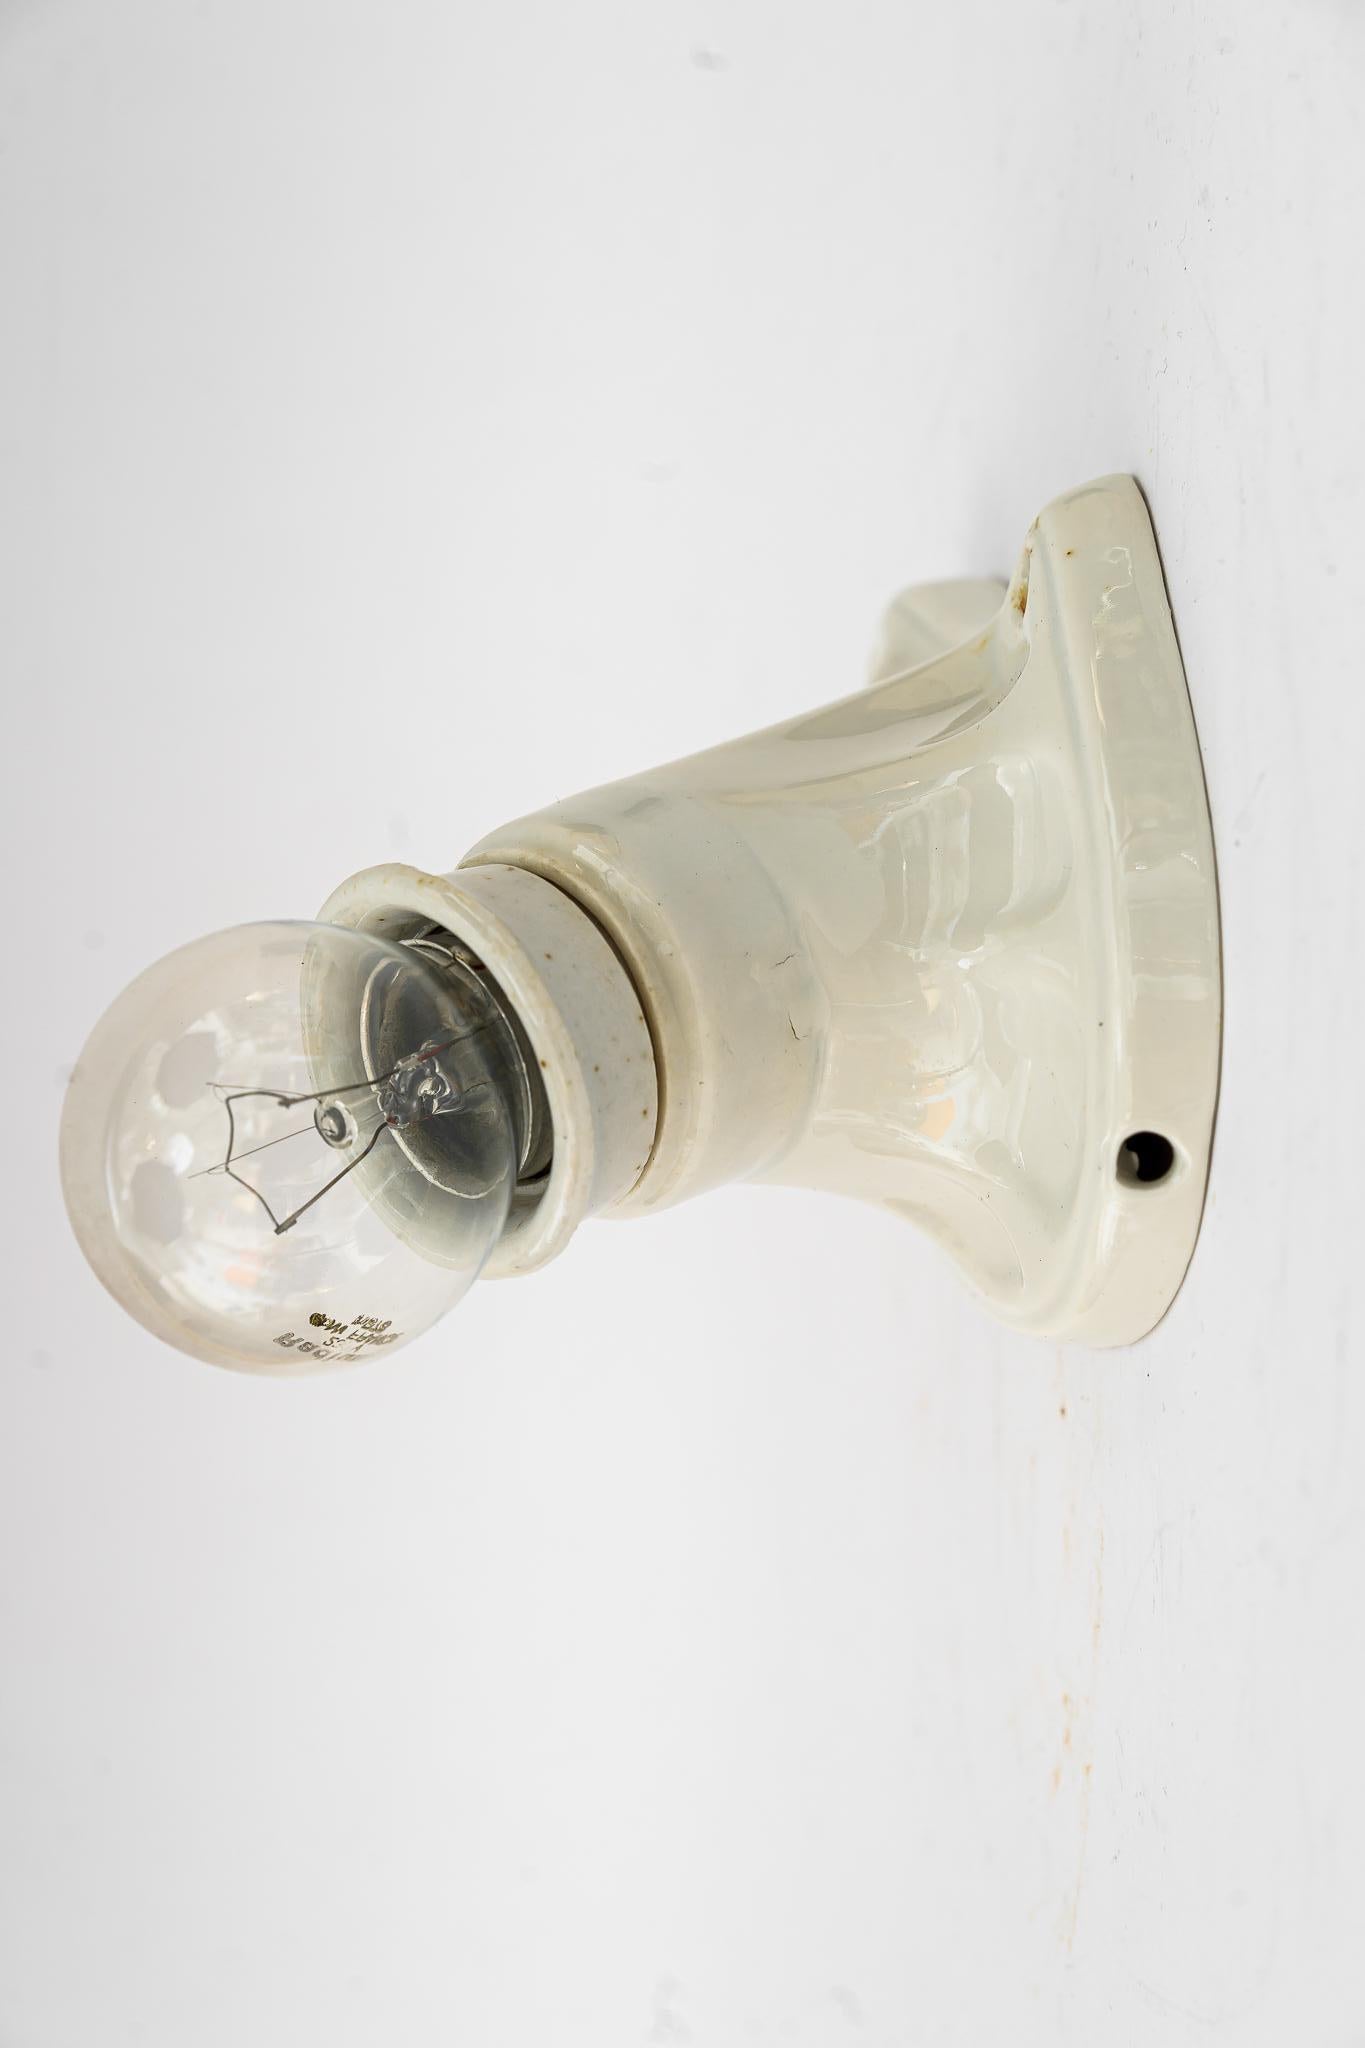 Small bauhaus ceramic wall lamp vienna around 1920s
The bulb is not included.
Original condition.